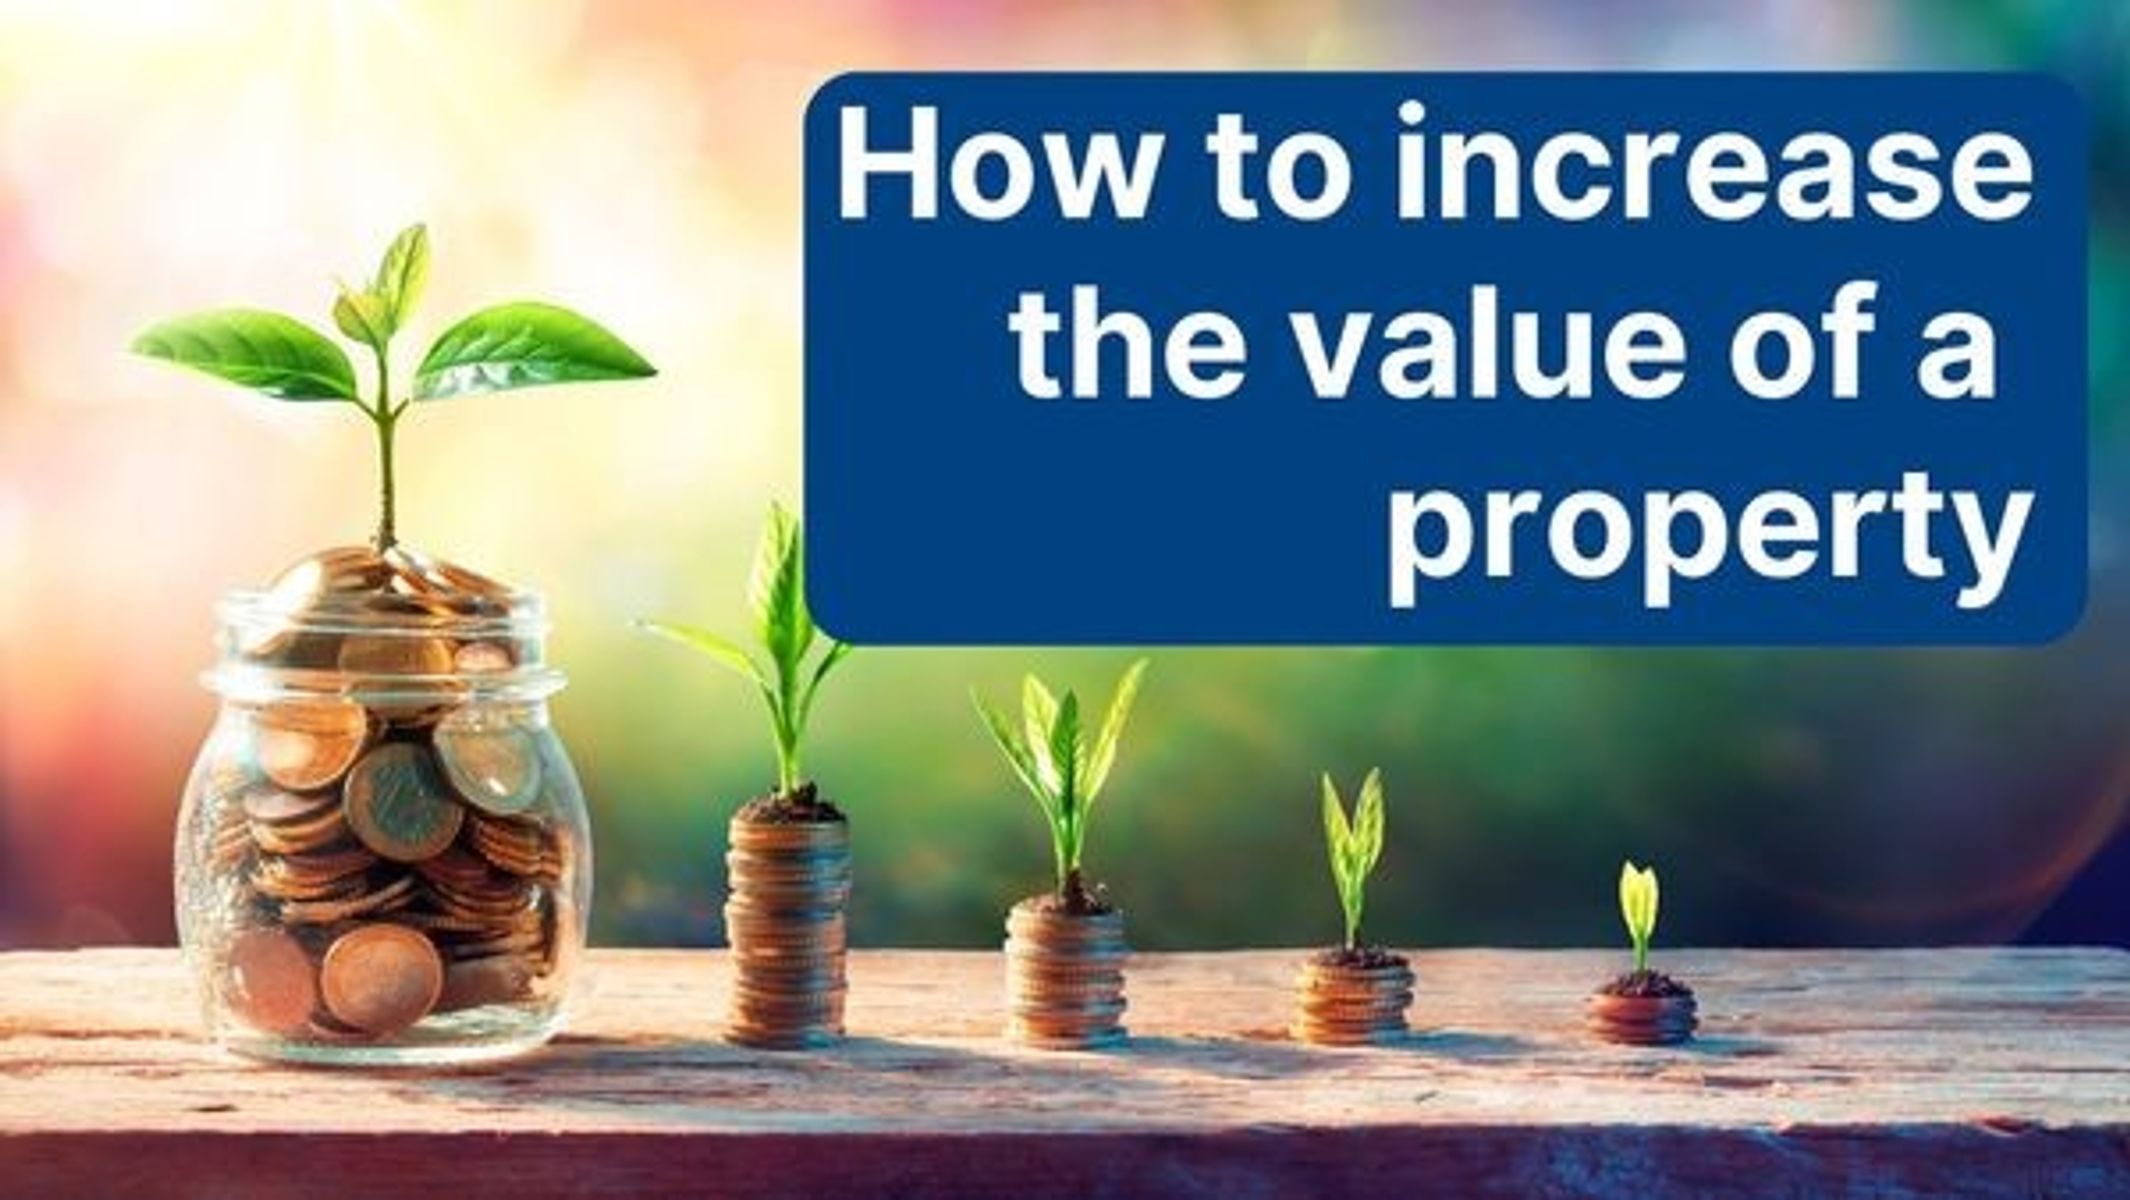 How to increase the value of a property?